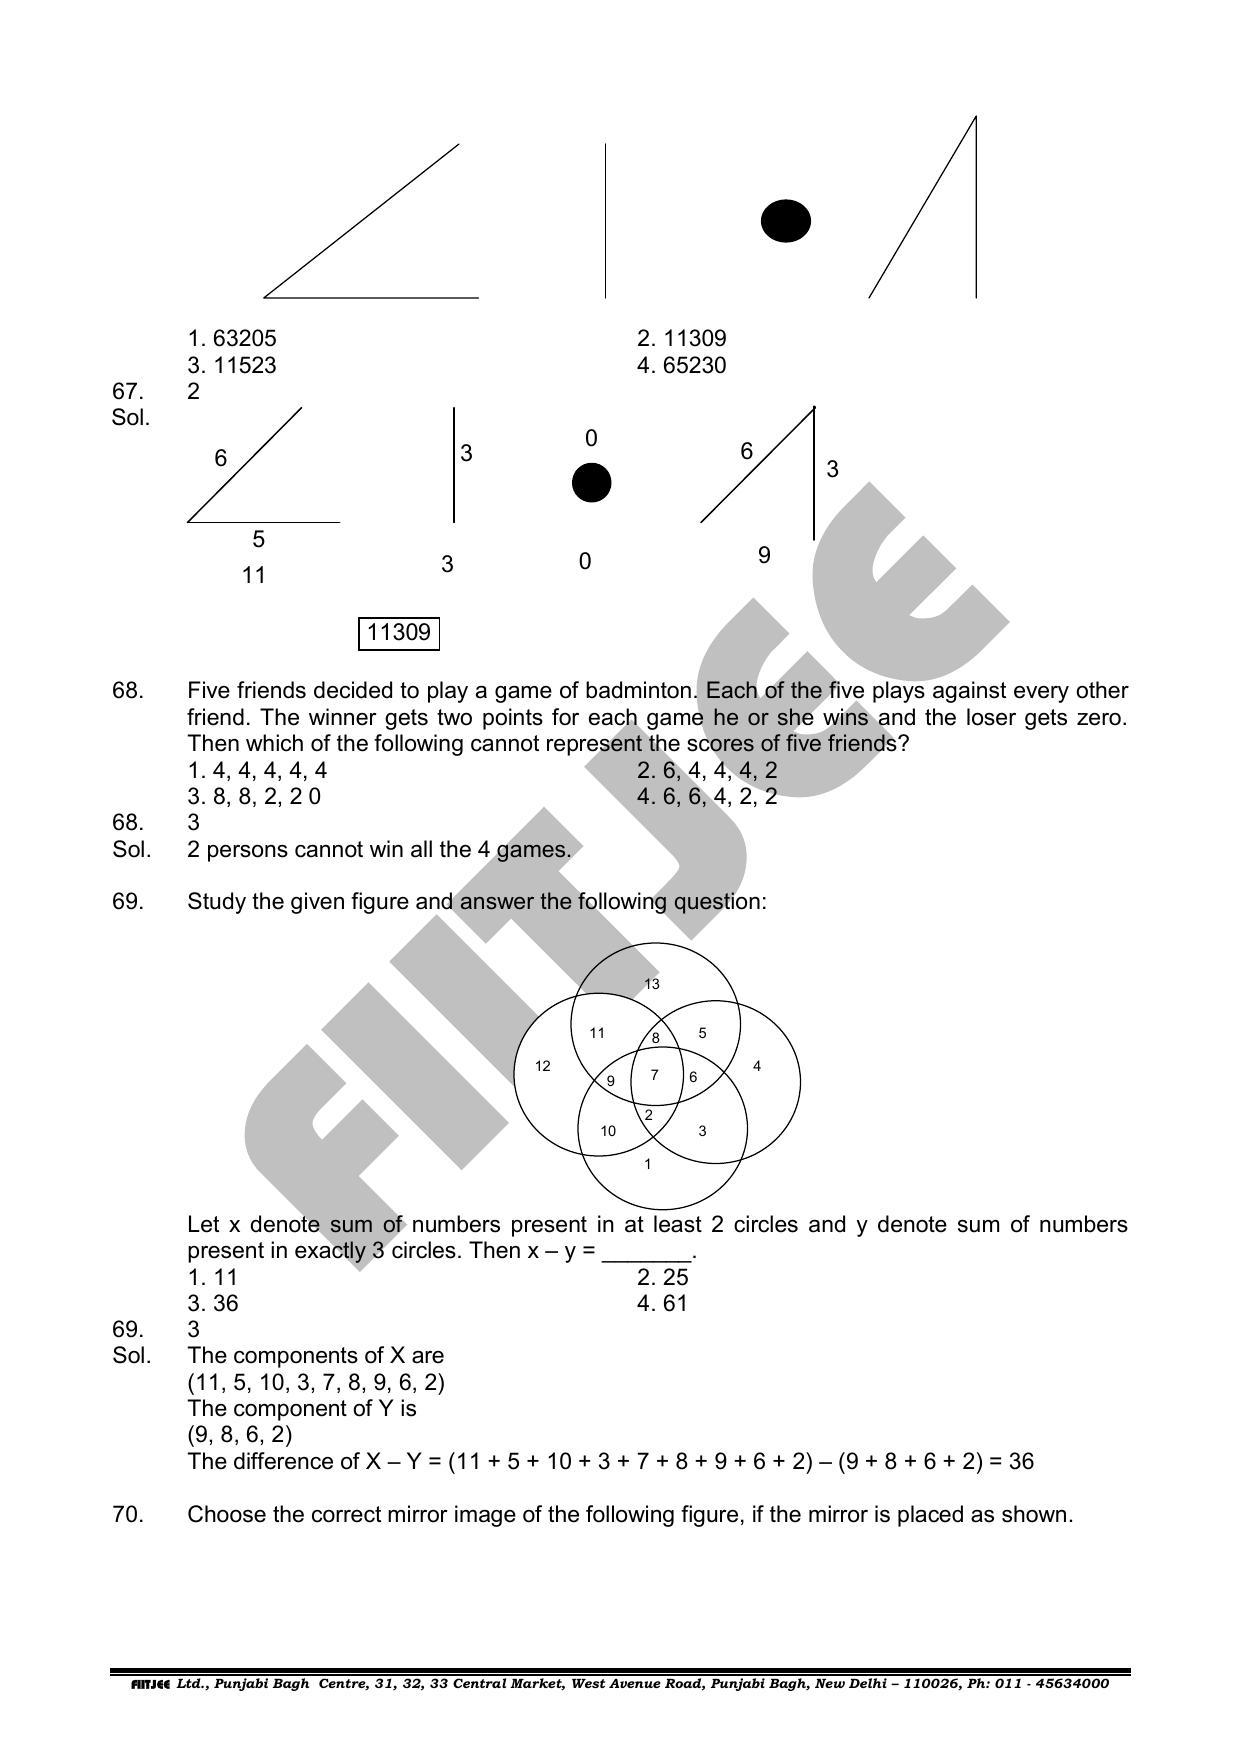 NTSE 2019 (Stage II) MAT Question Paper with Solution (June 16, 2019) - Page 22